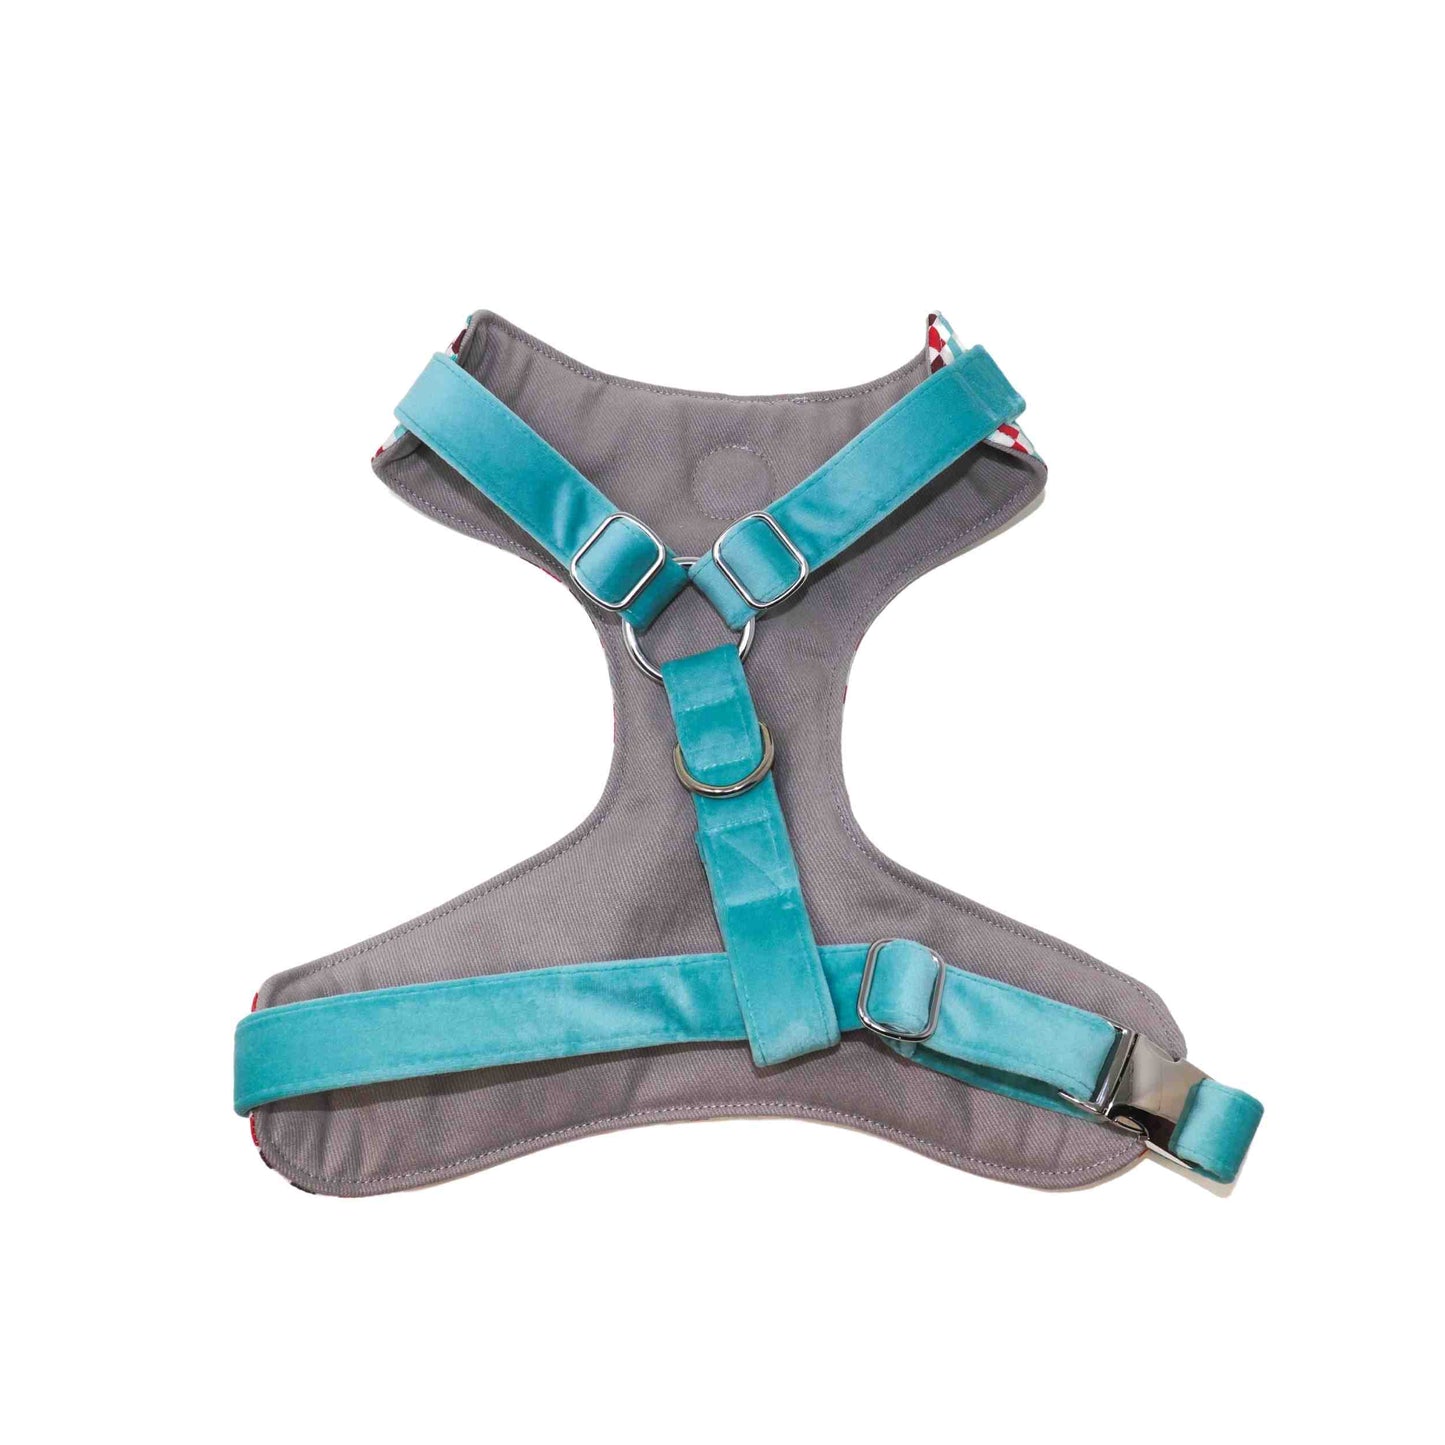 "Peppermint" Chest Harness